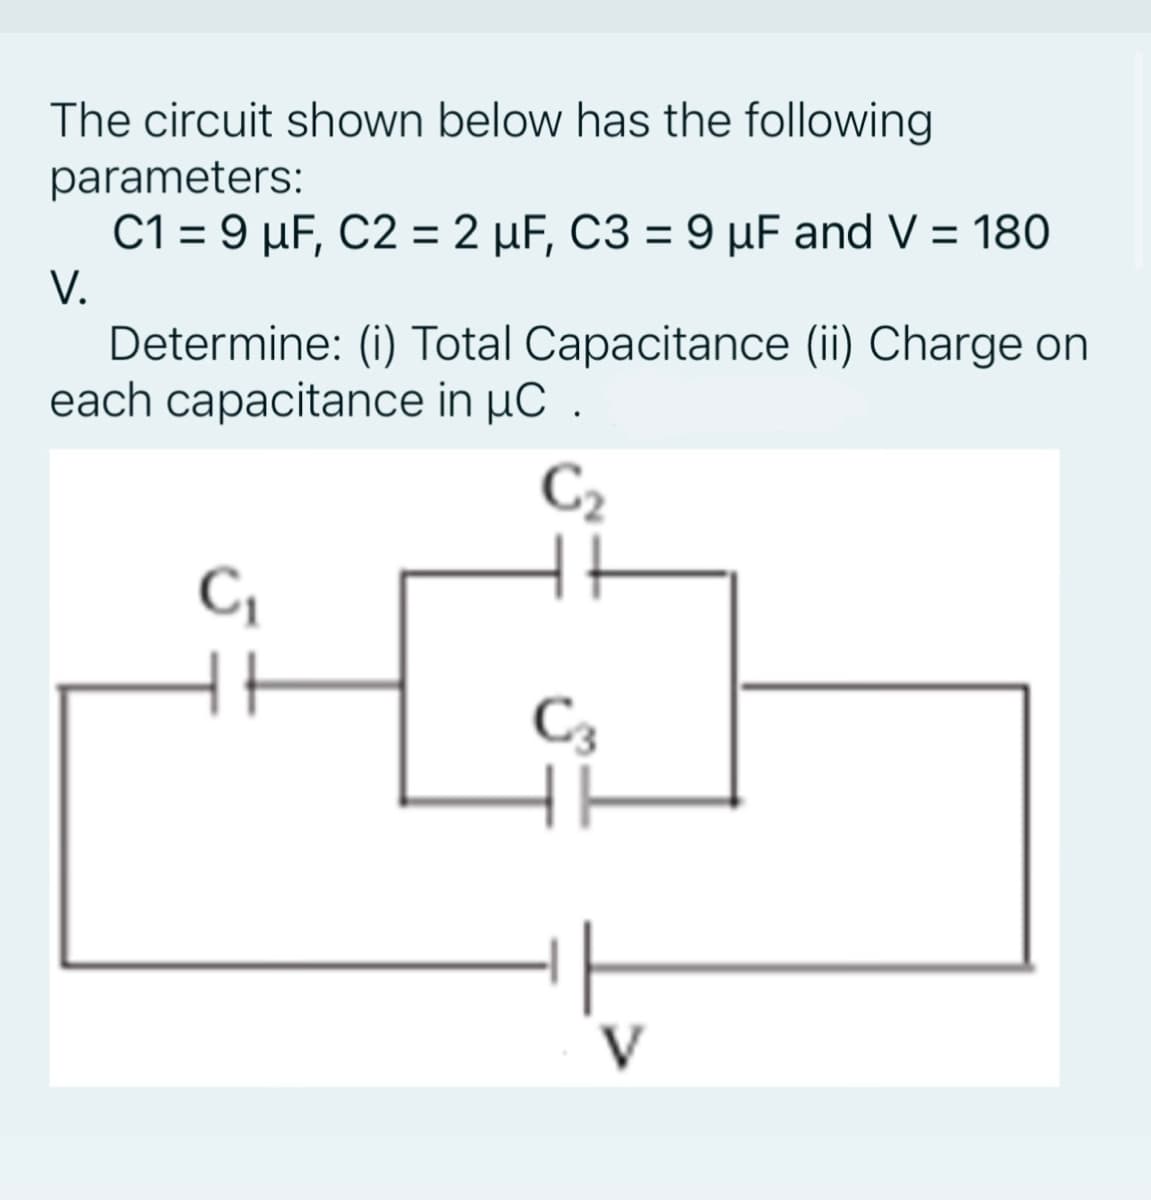 The circuit shown below has the following
parameters:
C1 = 9 µF, C2 = 2 µF, C3 = 9 µF and V = 180
%3D
V.
Determine: (i) Total Capacitance (ii) Charge on
each capacitance in µC .
C2
C,
C3
V
